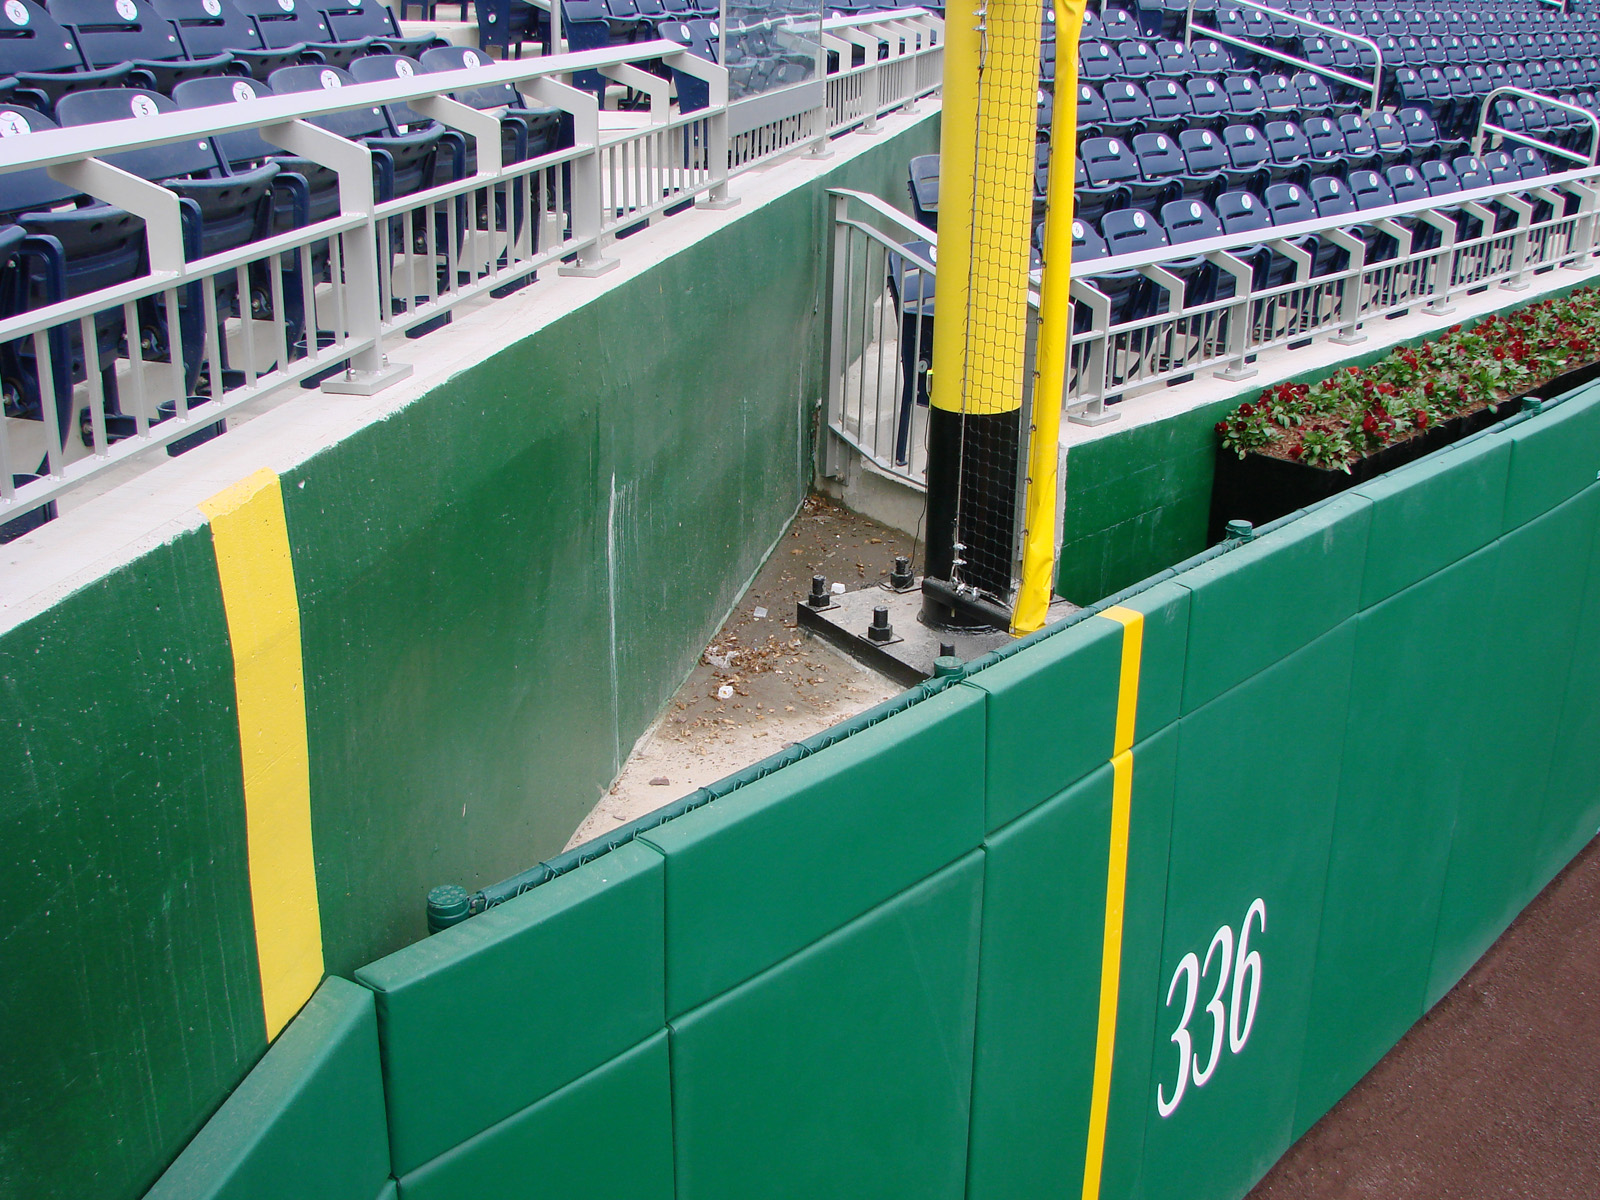 Nationals Park LF out of play area